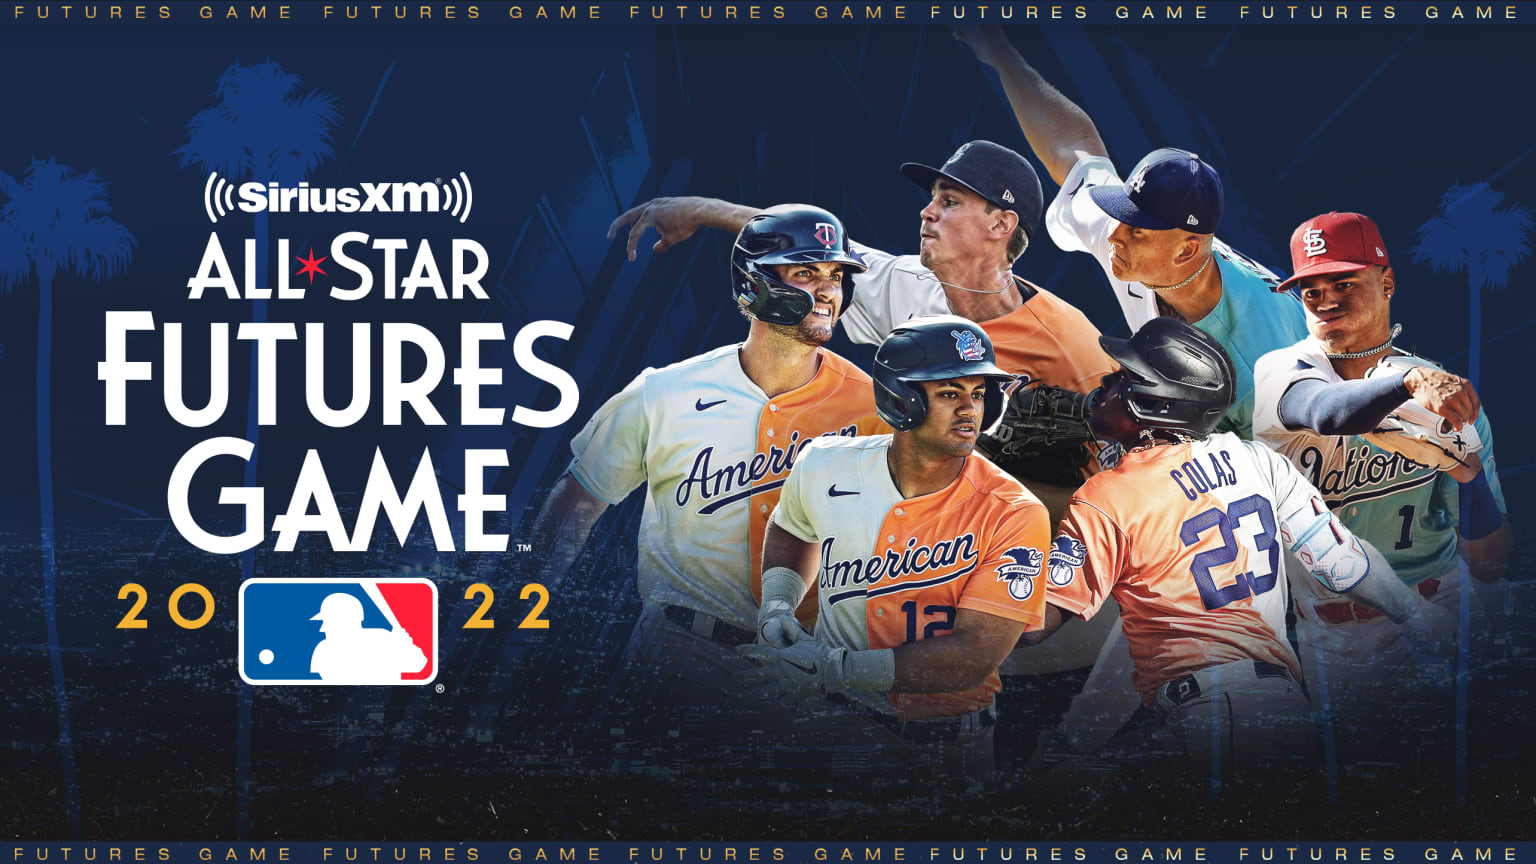 ON THE FIELD At The 2021 MLB Futures Game, All-Star Weekend: Episode 3